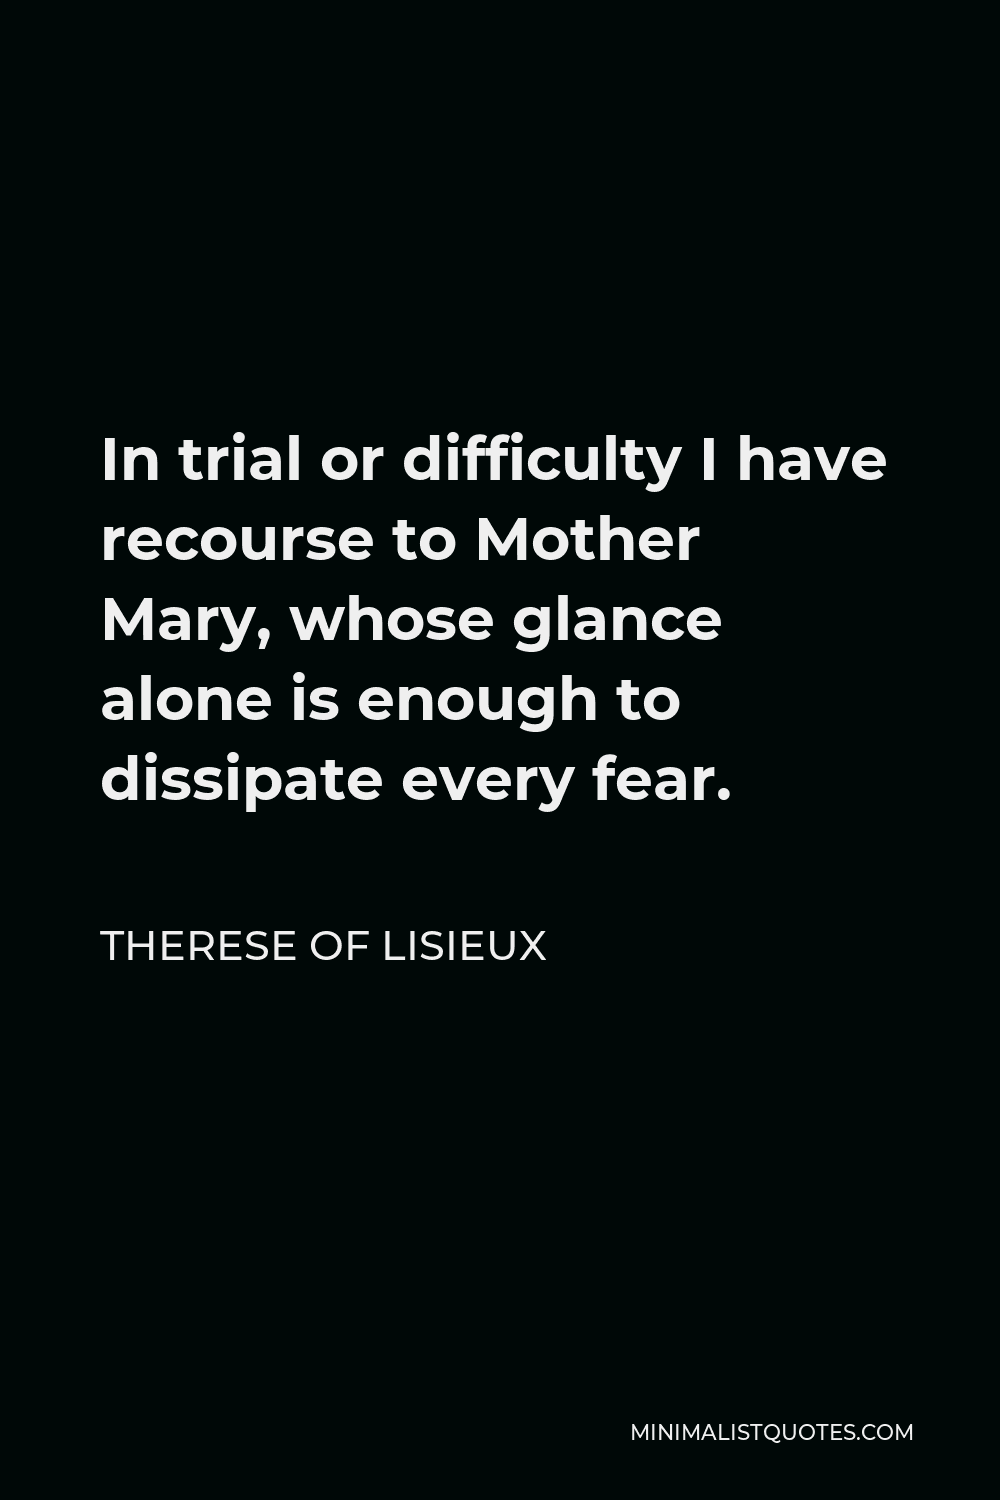 Therese of Lisieux Quote - In trial or difficulty I have recourse to Mother Mary, whose glance alone is enough to dissipate every fear.